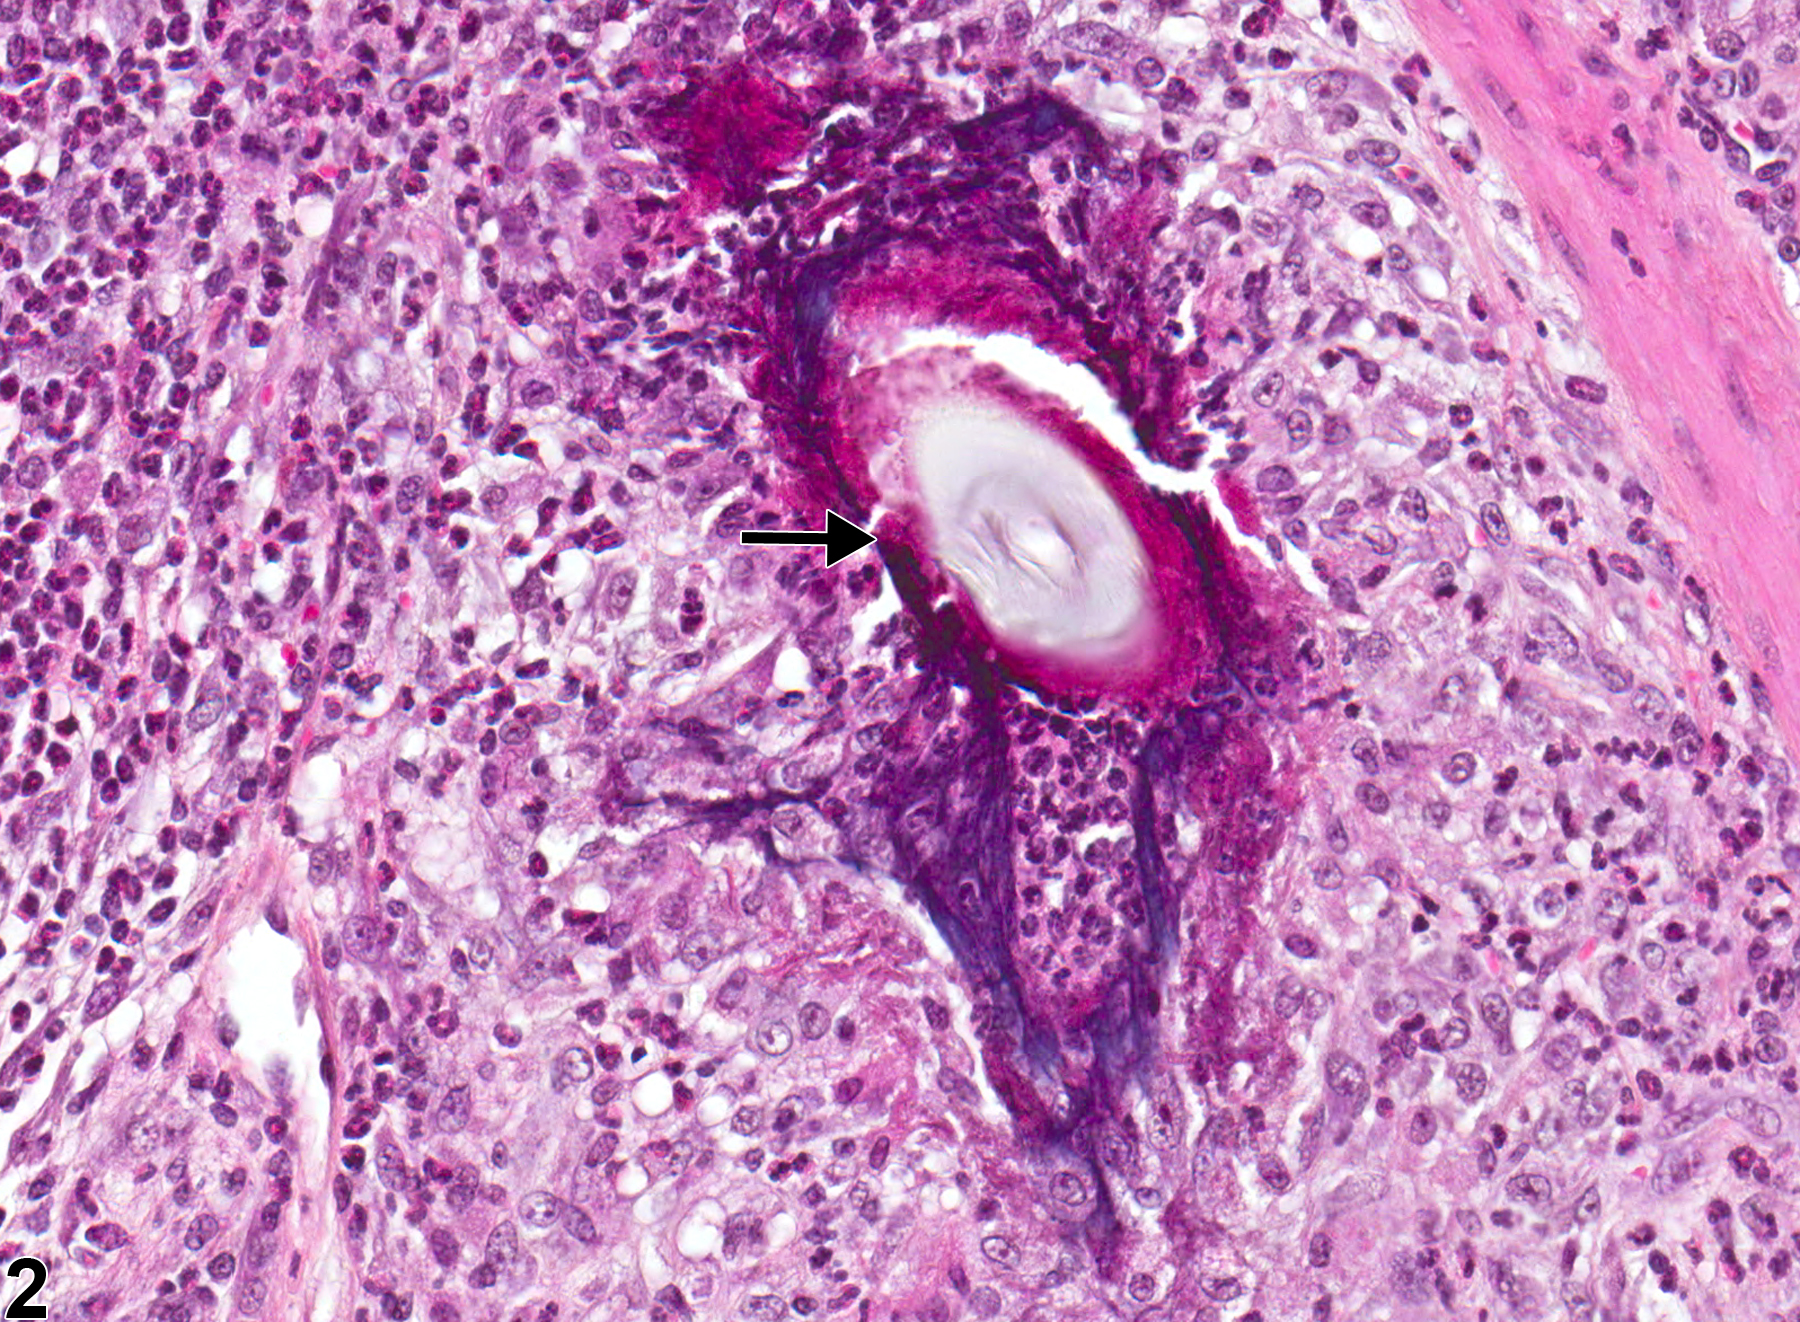 Image of foreign body in the glandular stomach from a male B6C3F1 mouse in a chronic study